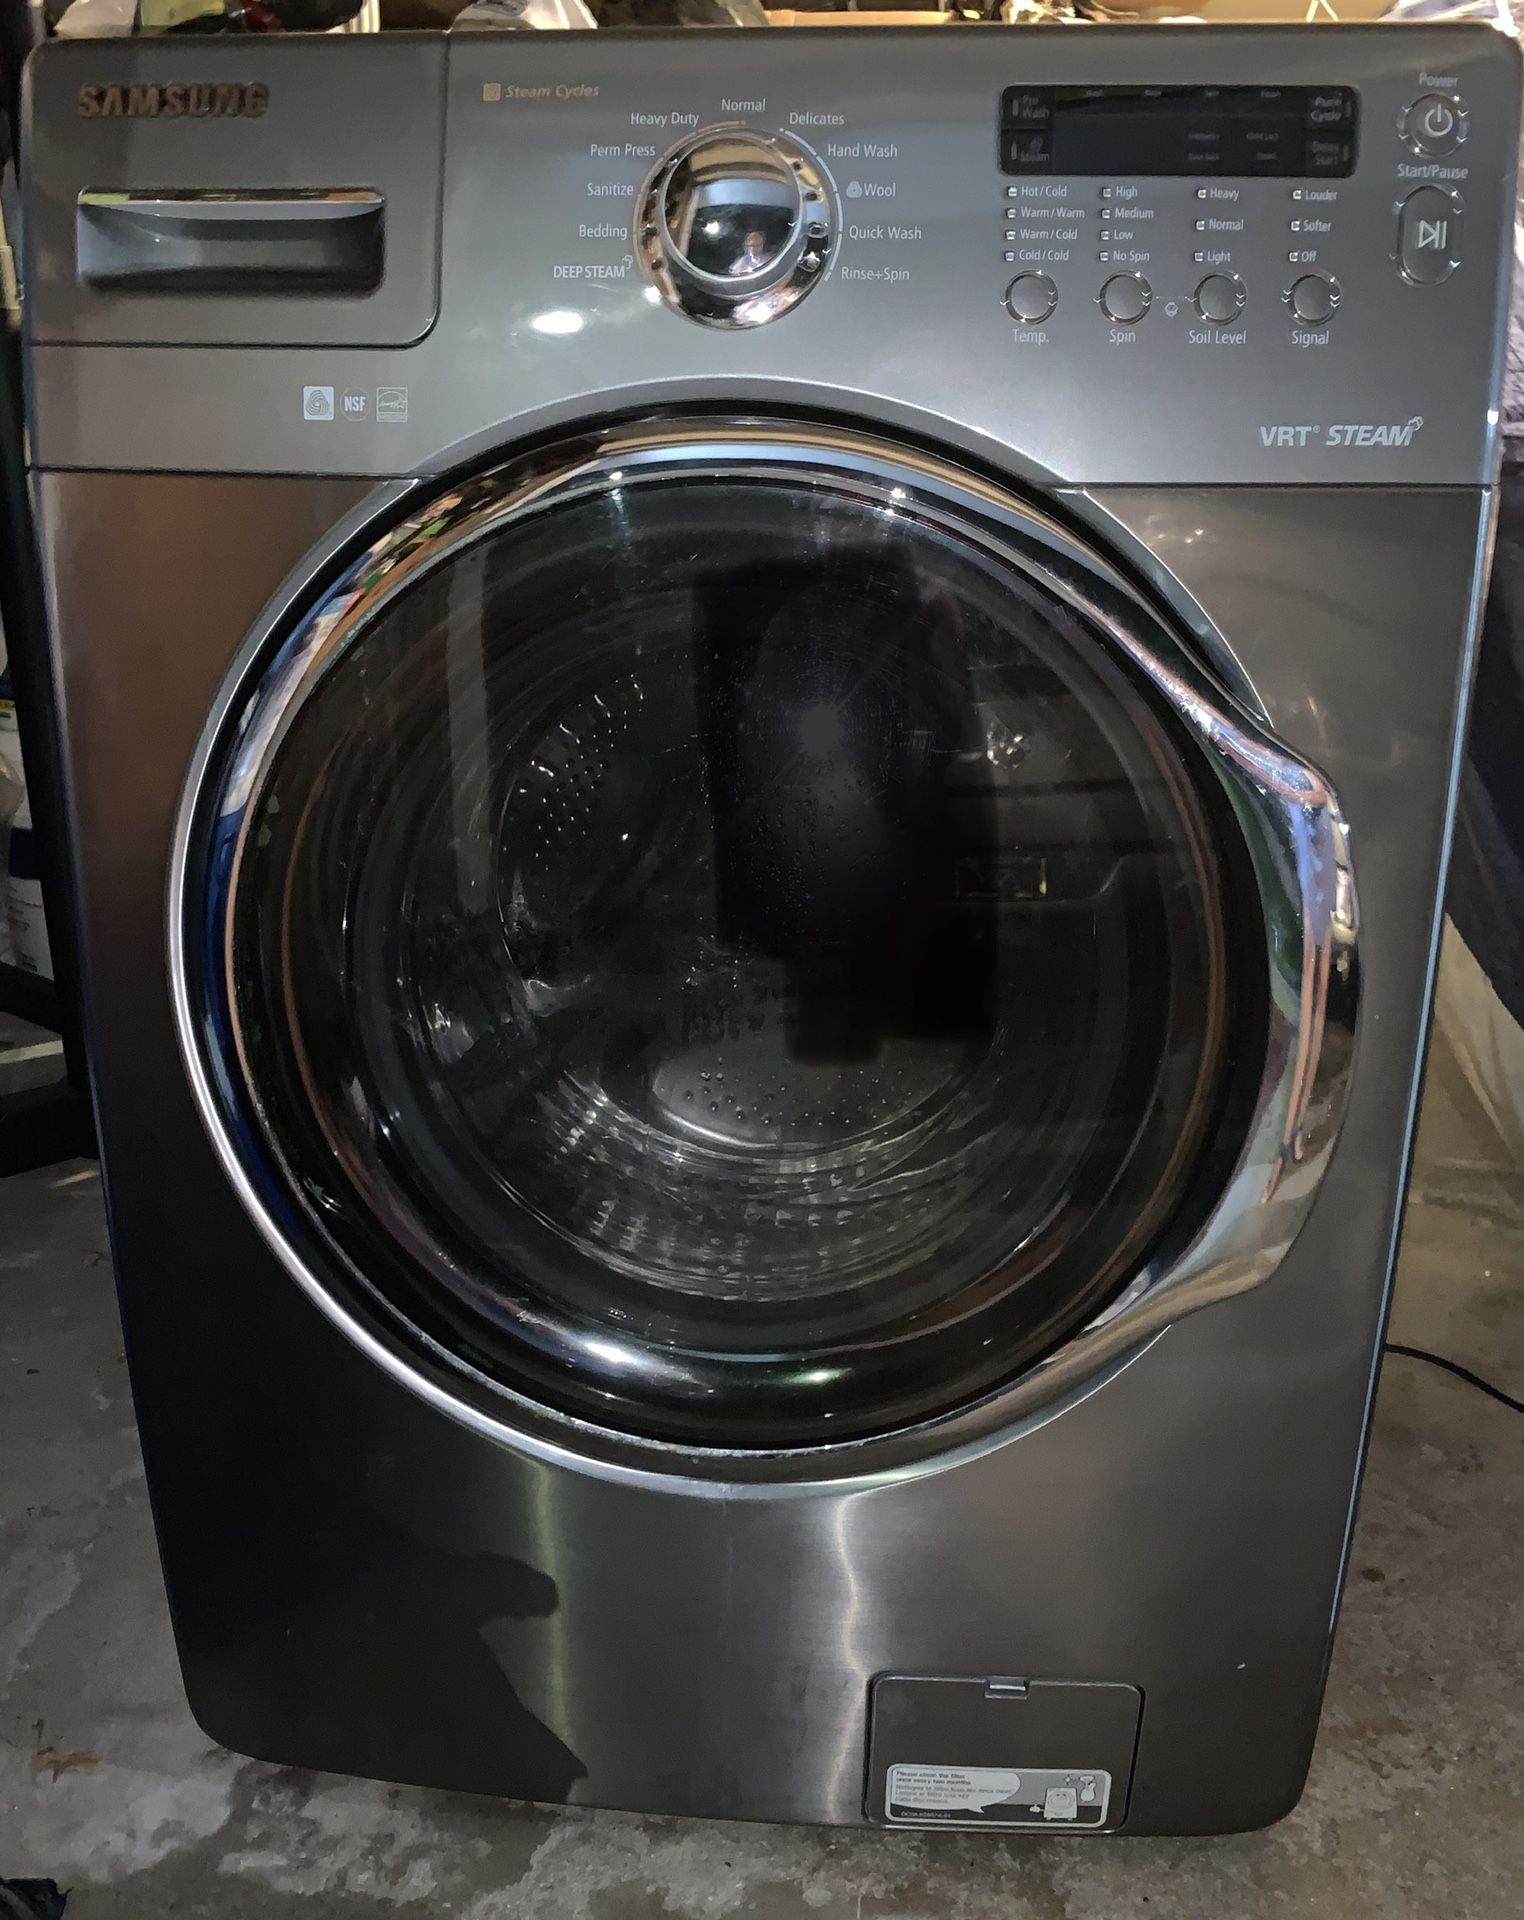 Samsung Stainless washing machine- works but doesn’t spin